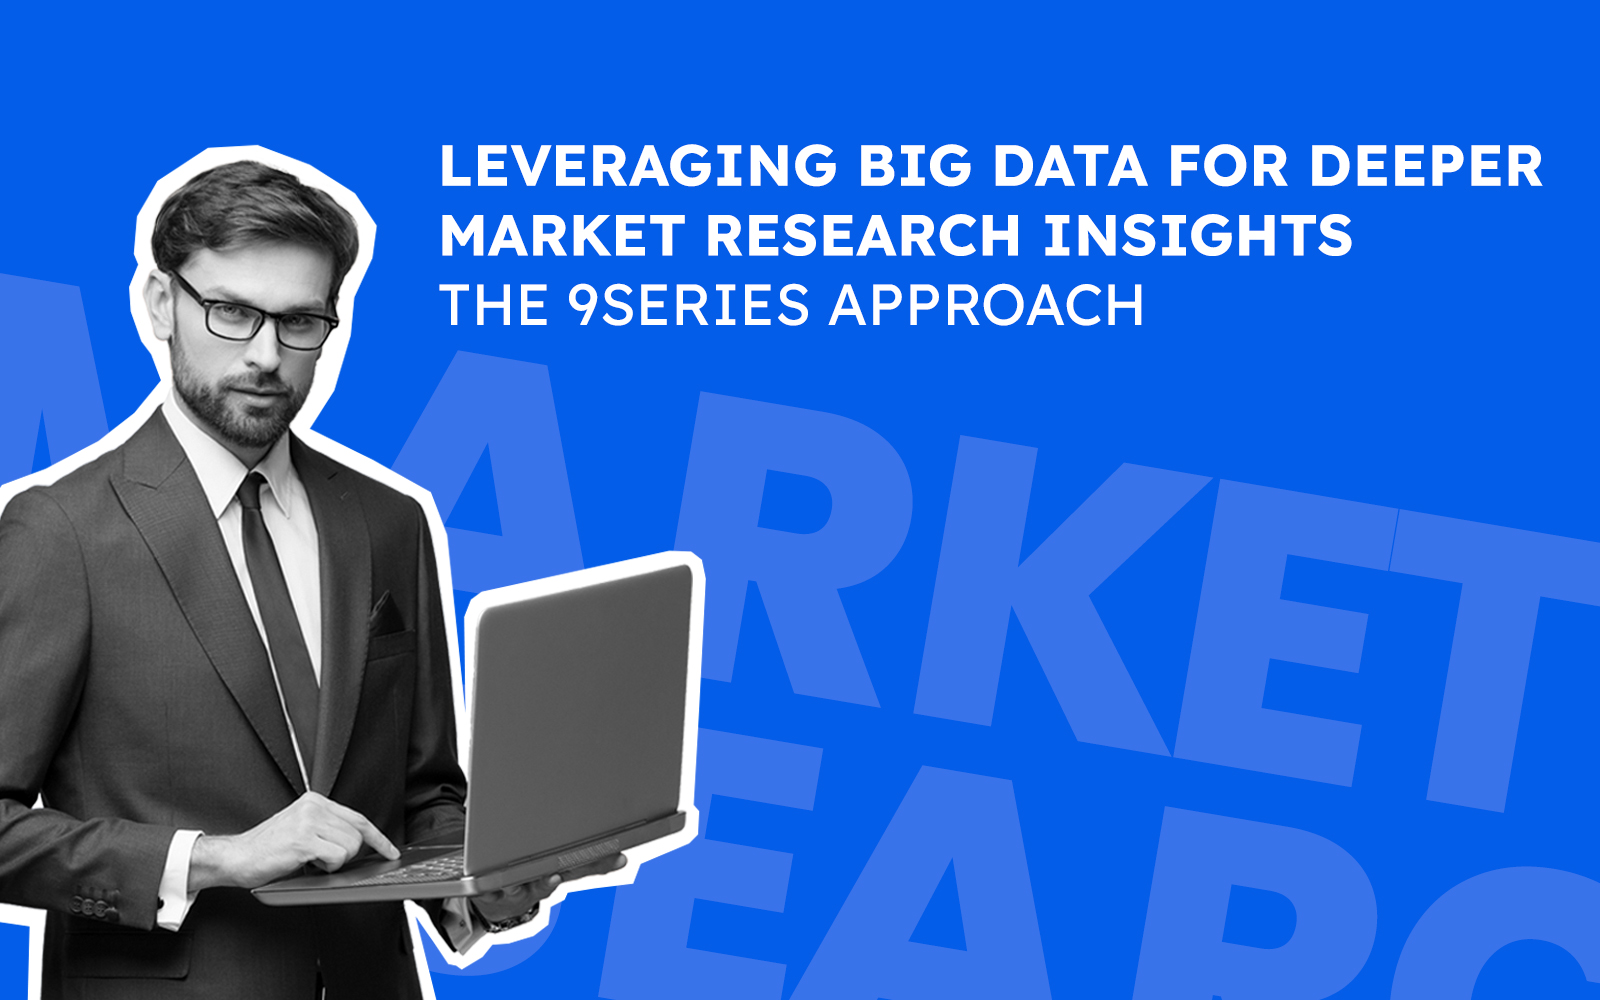 Big Data for Deeper Market Research Insights